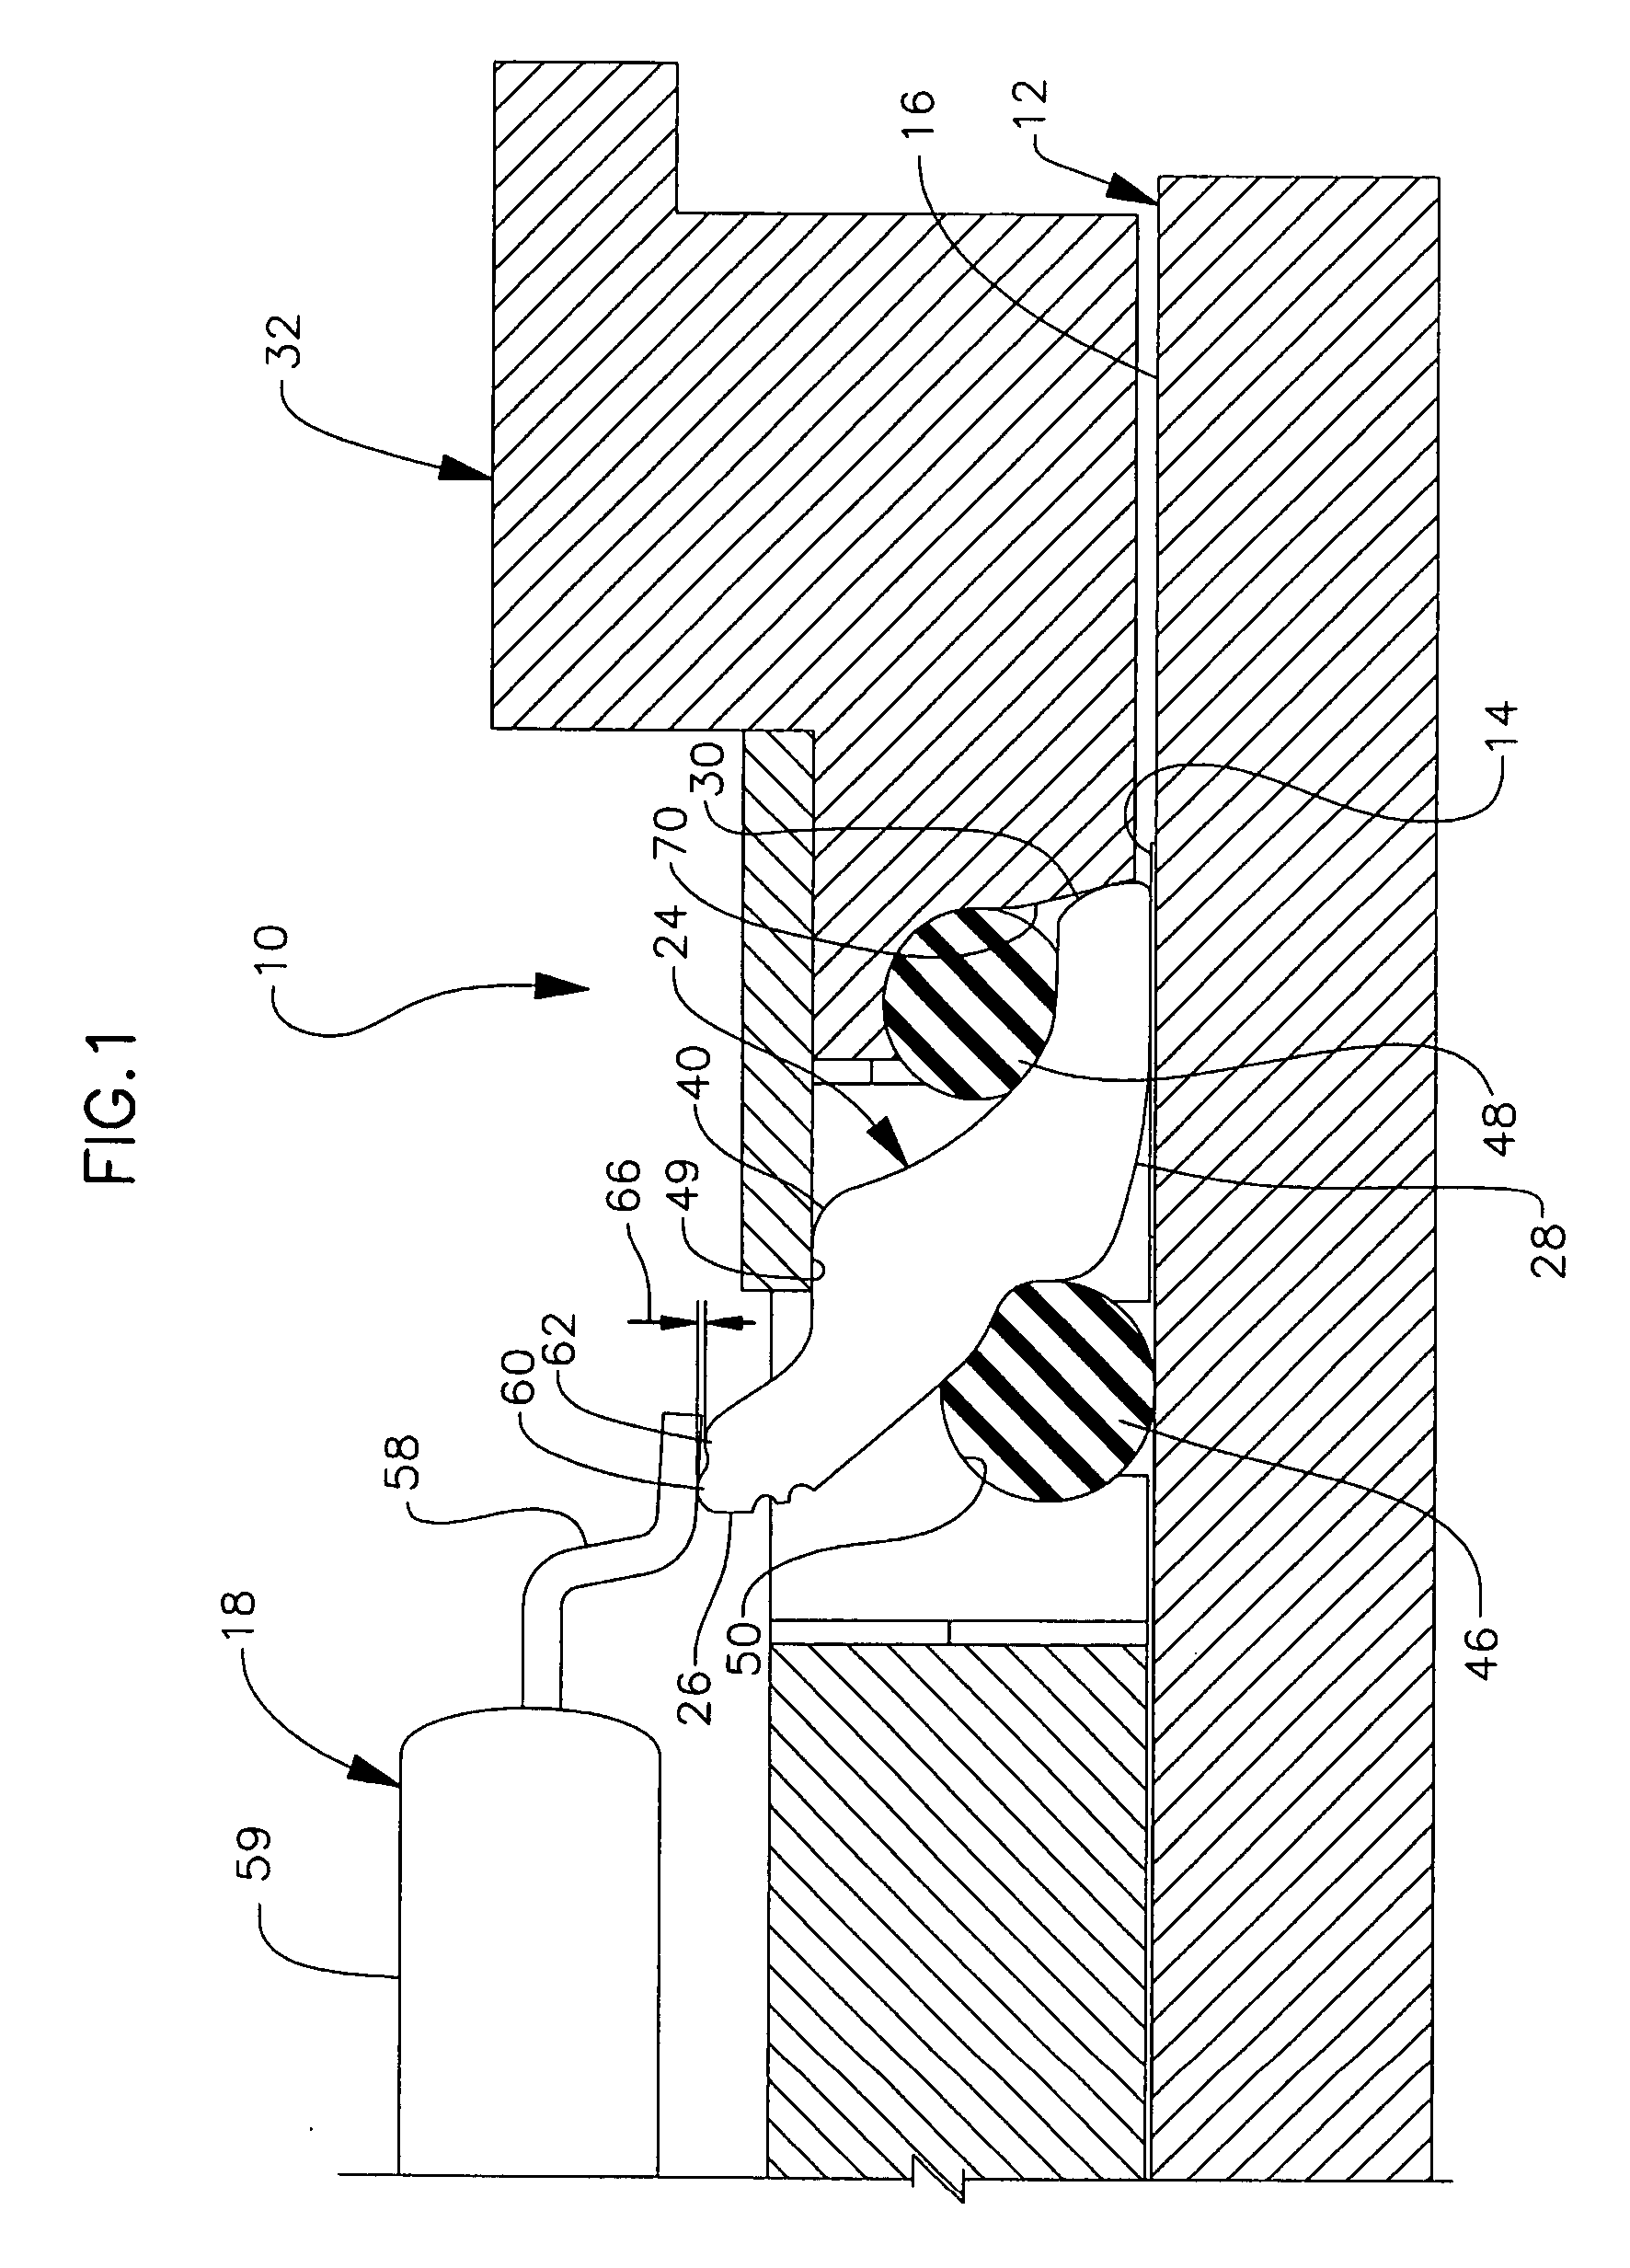 Electronic device test set and contact used therein